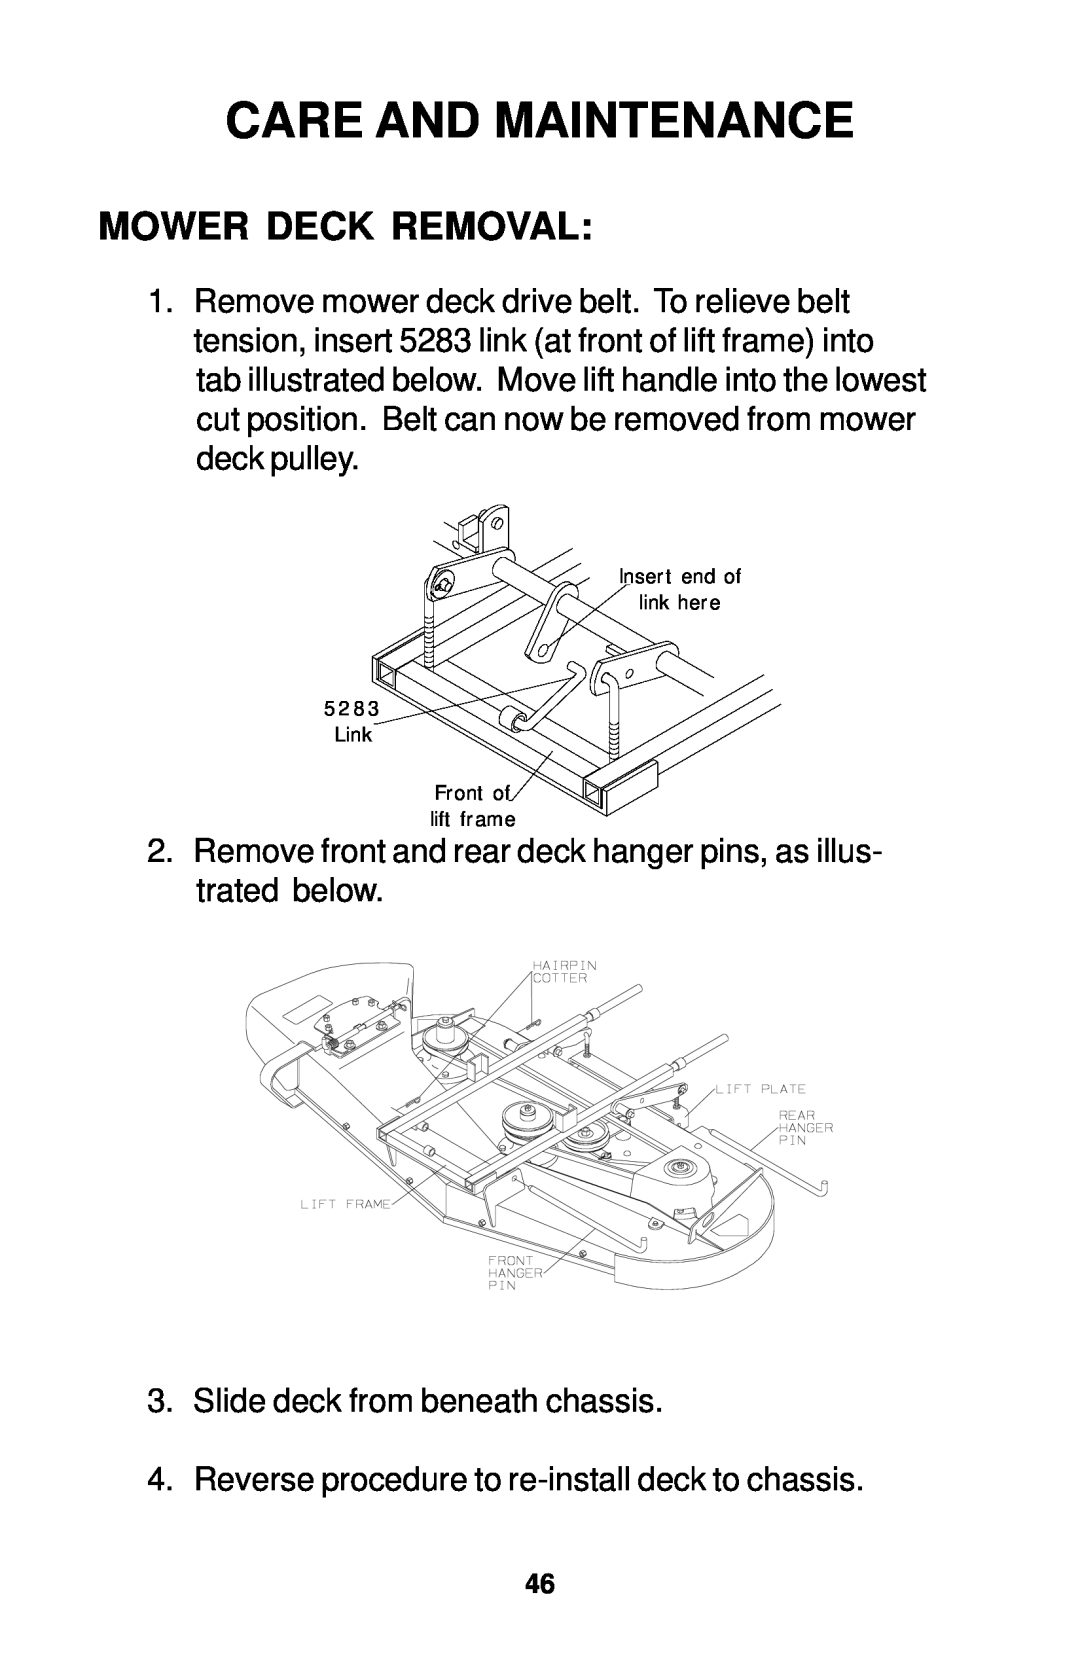 Dixon 18134-1004 manual Mower Deck Removal, Care And Maintenance 